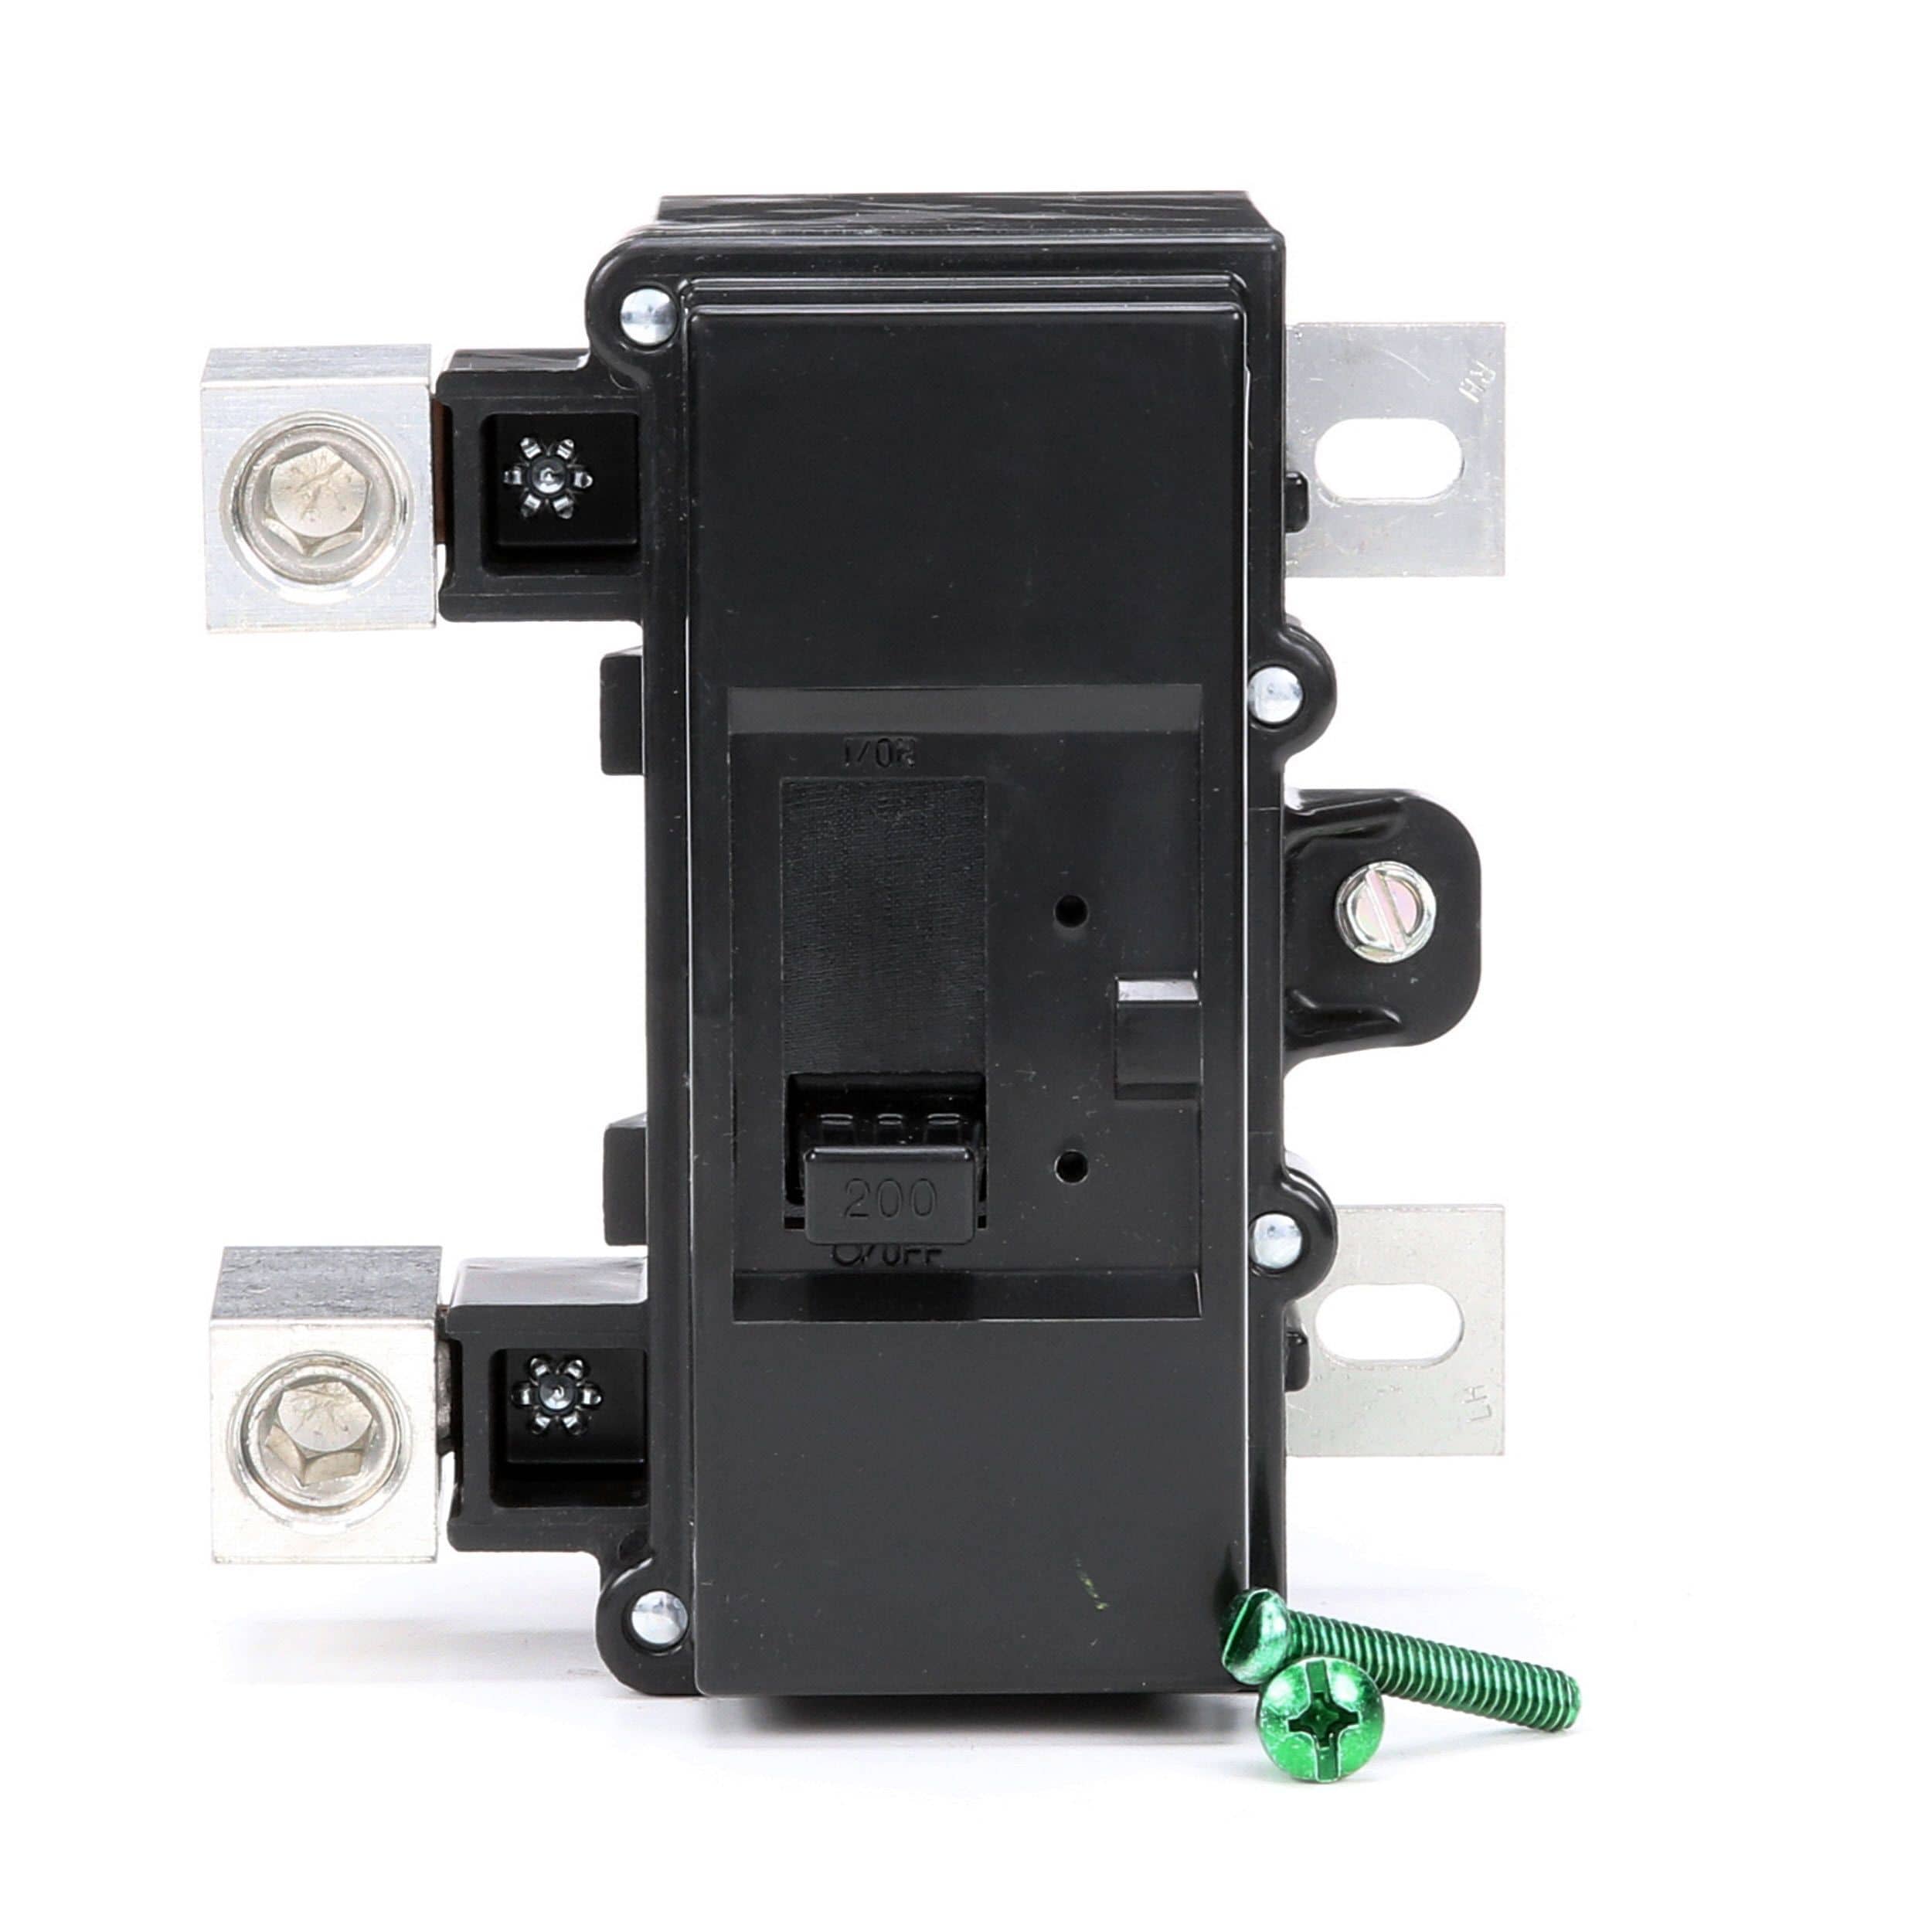 Square D By Schneider Electric QOM2200VH 200-Amp Circuit Breaker for sale online 